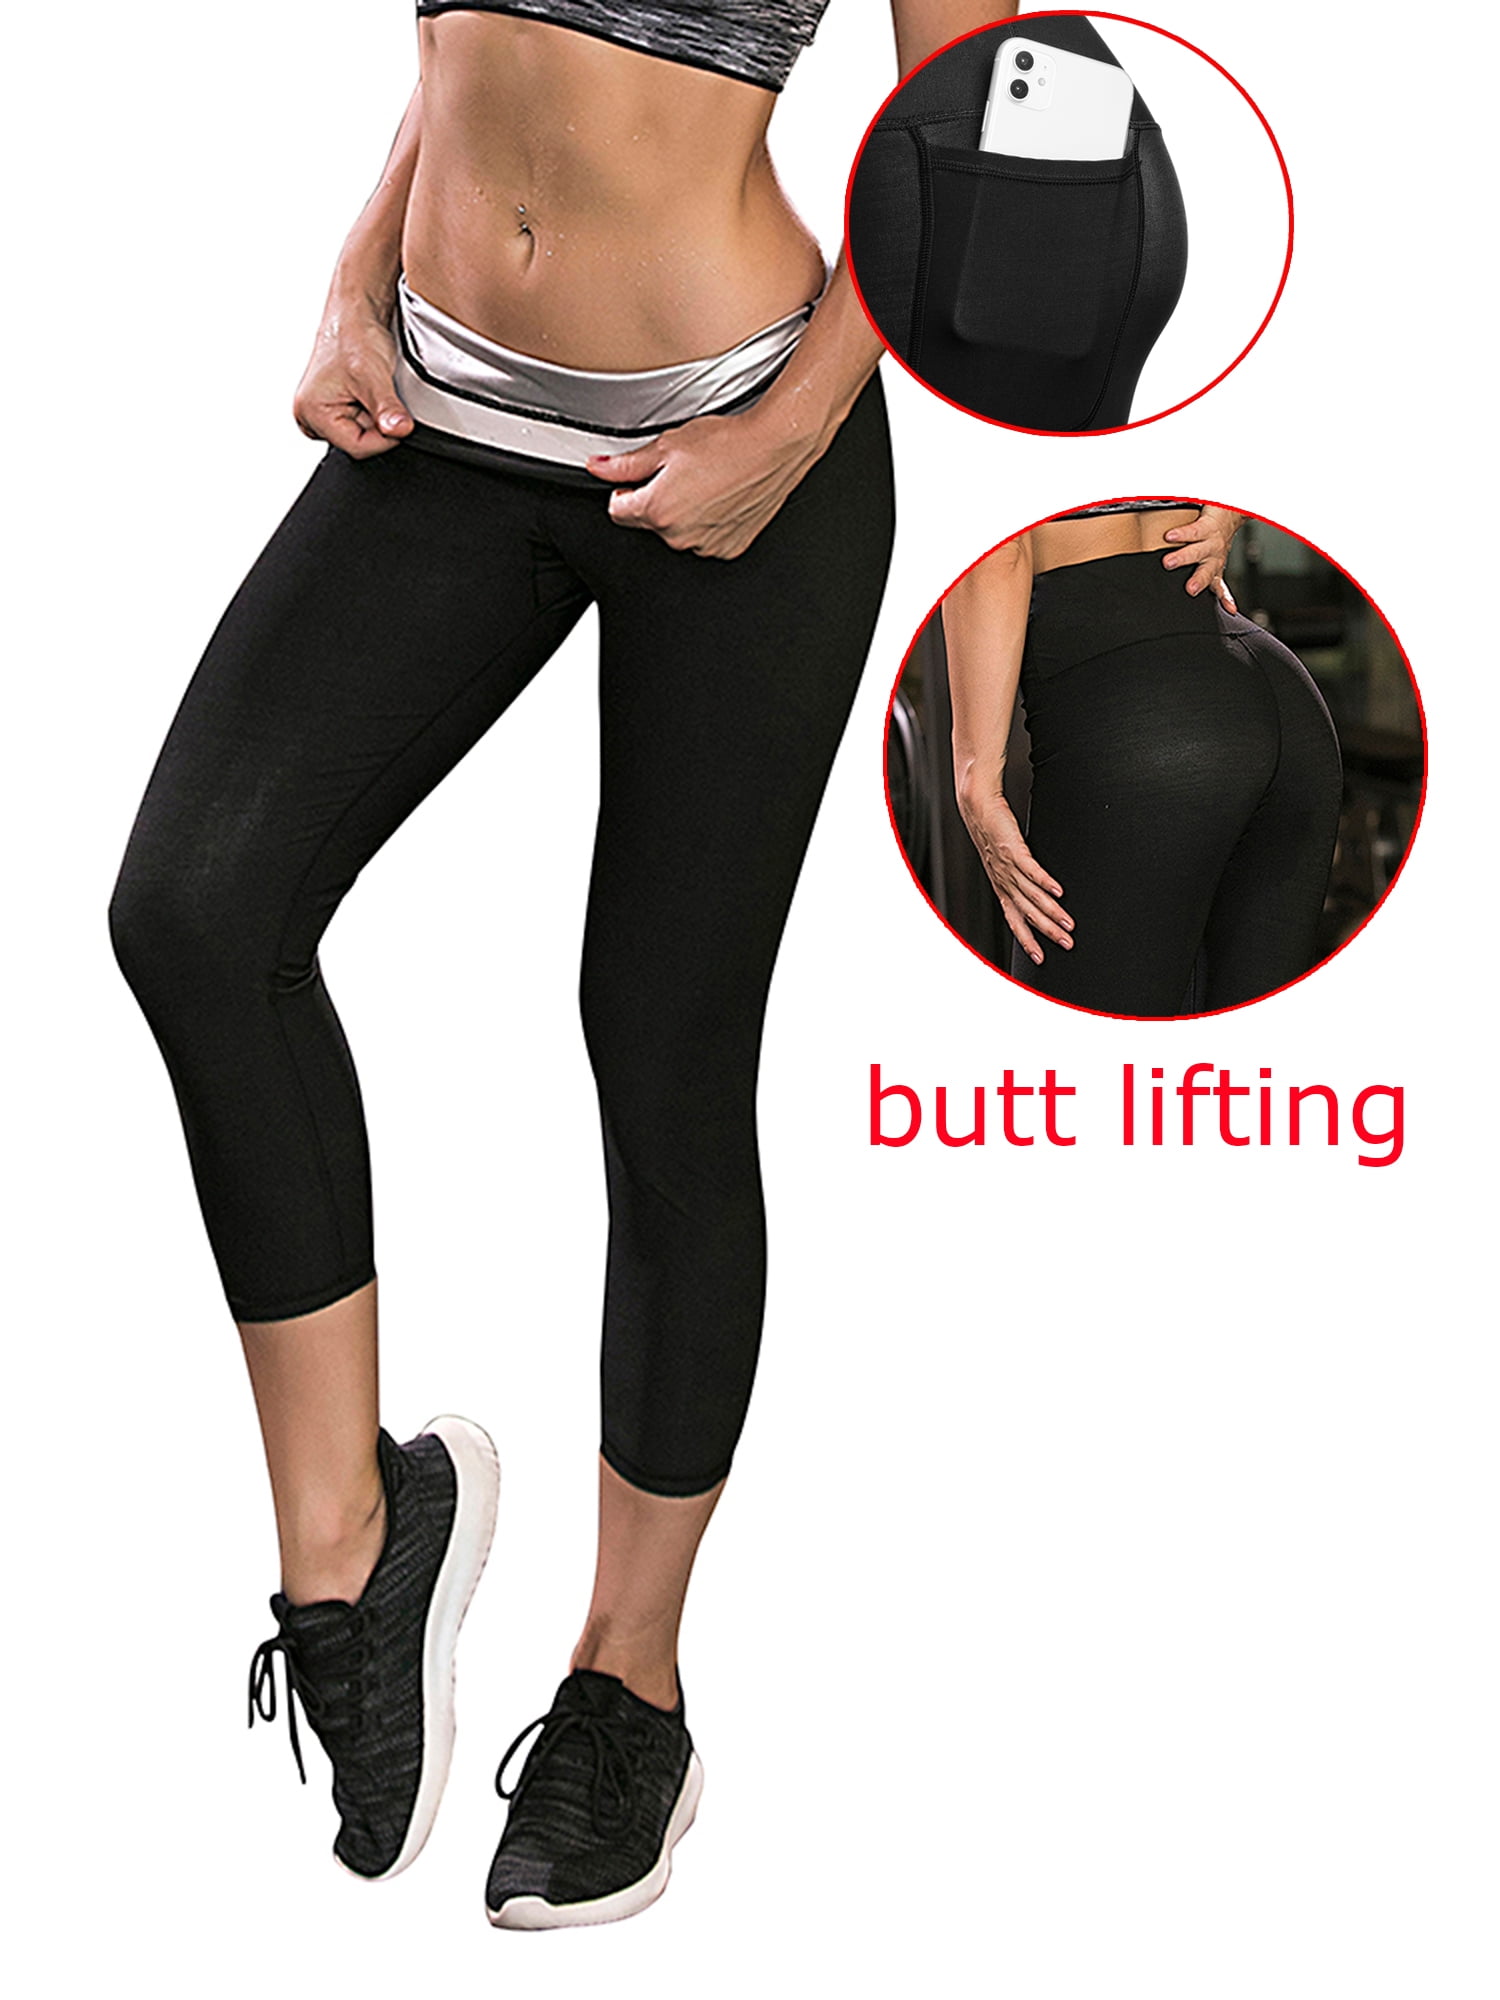 Sleeping slimming Leggings Compression Diet pants spats Shaper Stocking Fat off 